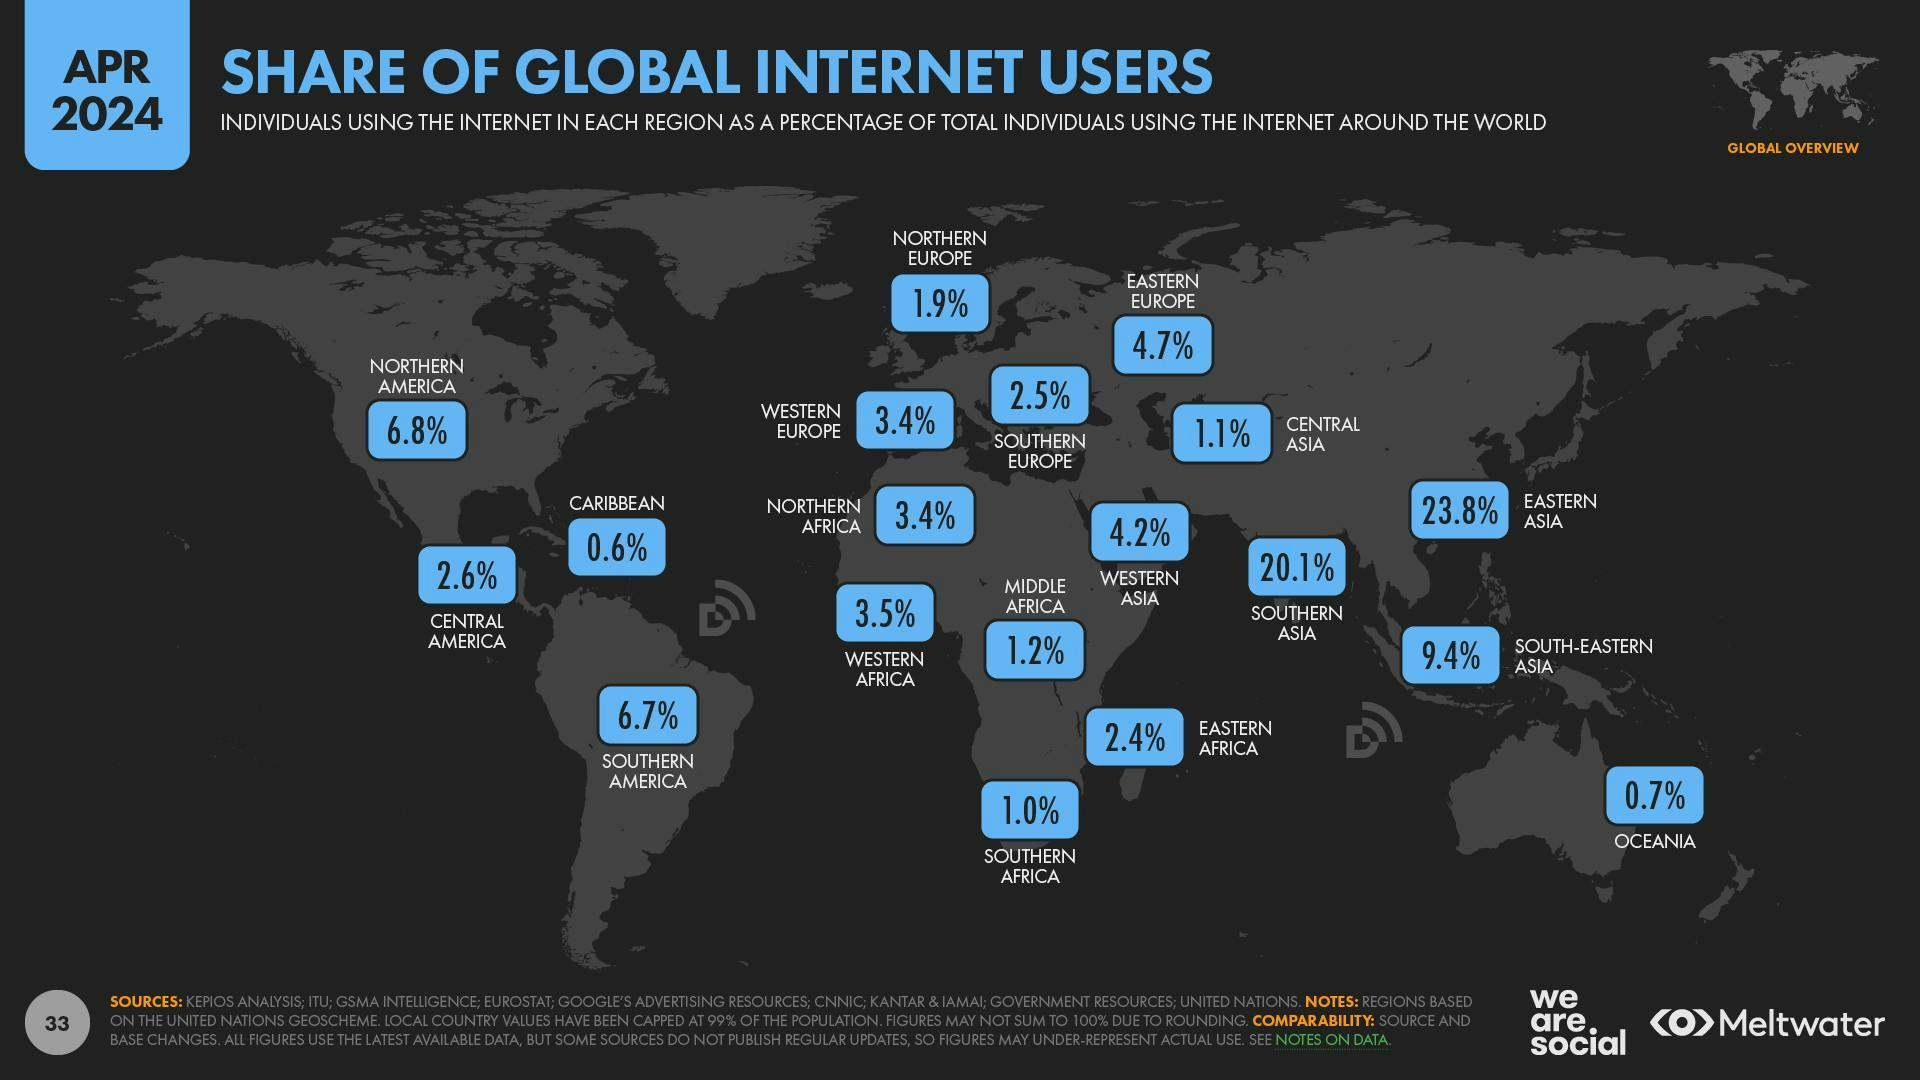 Share of global internet users map